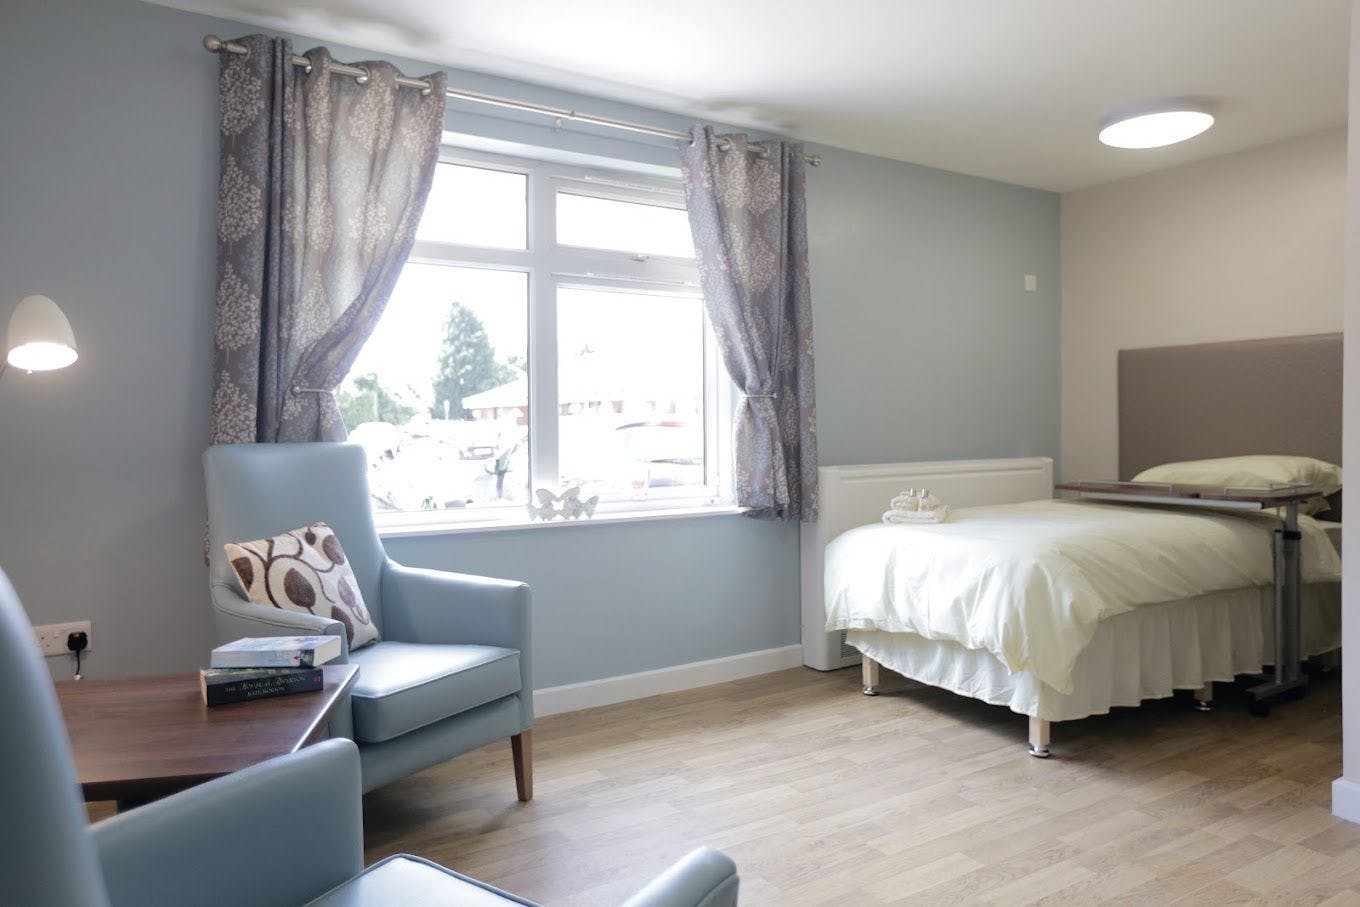 Minster Care Group - Turnpike Court care home 3